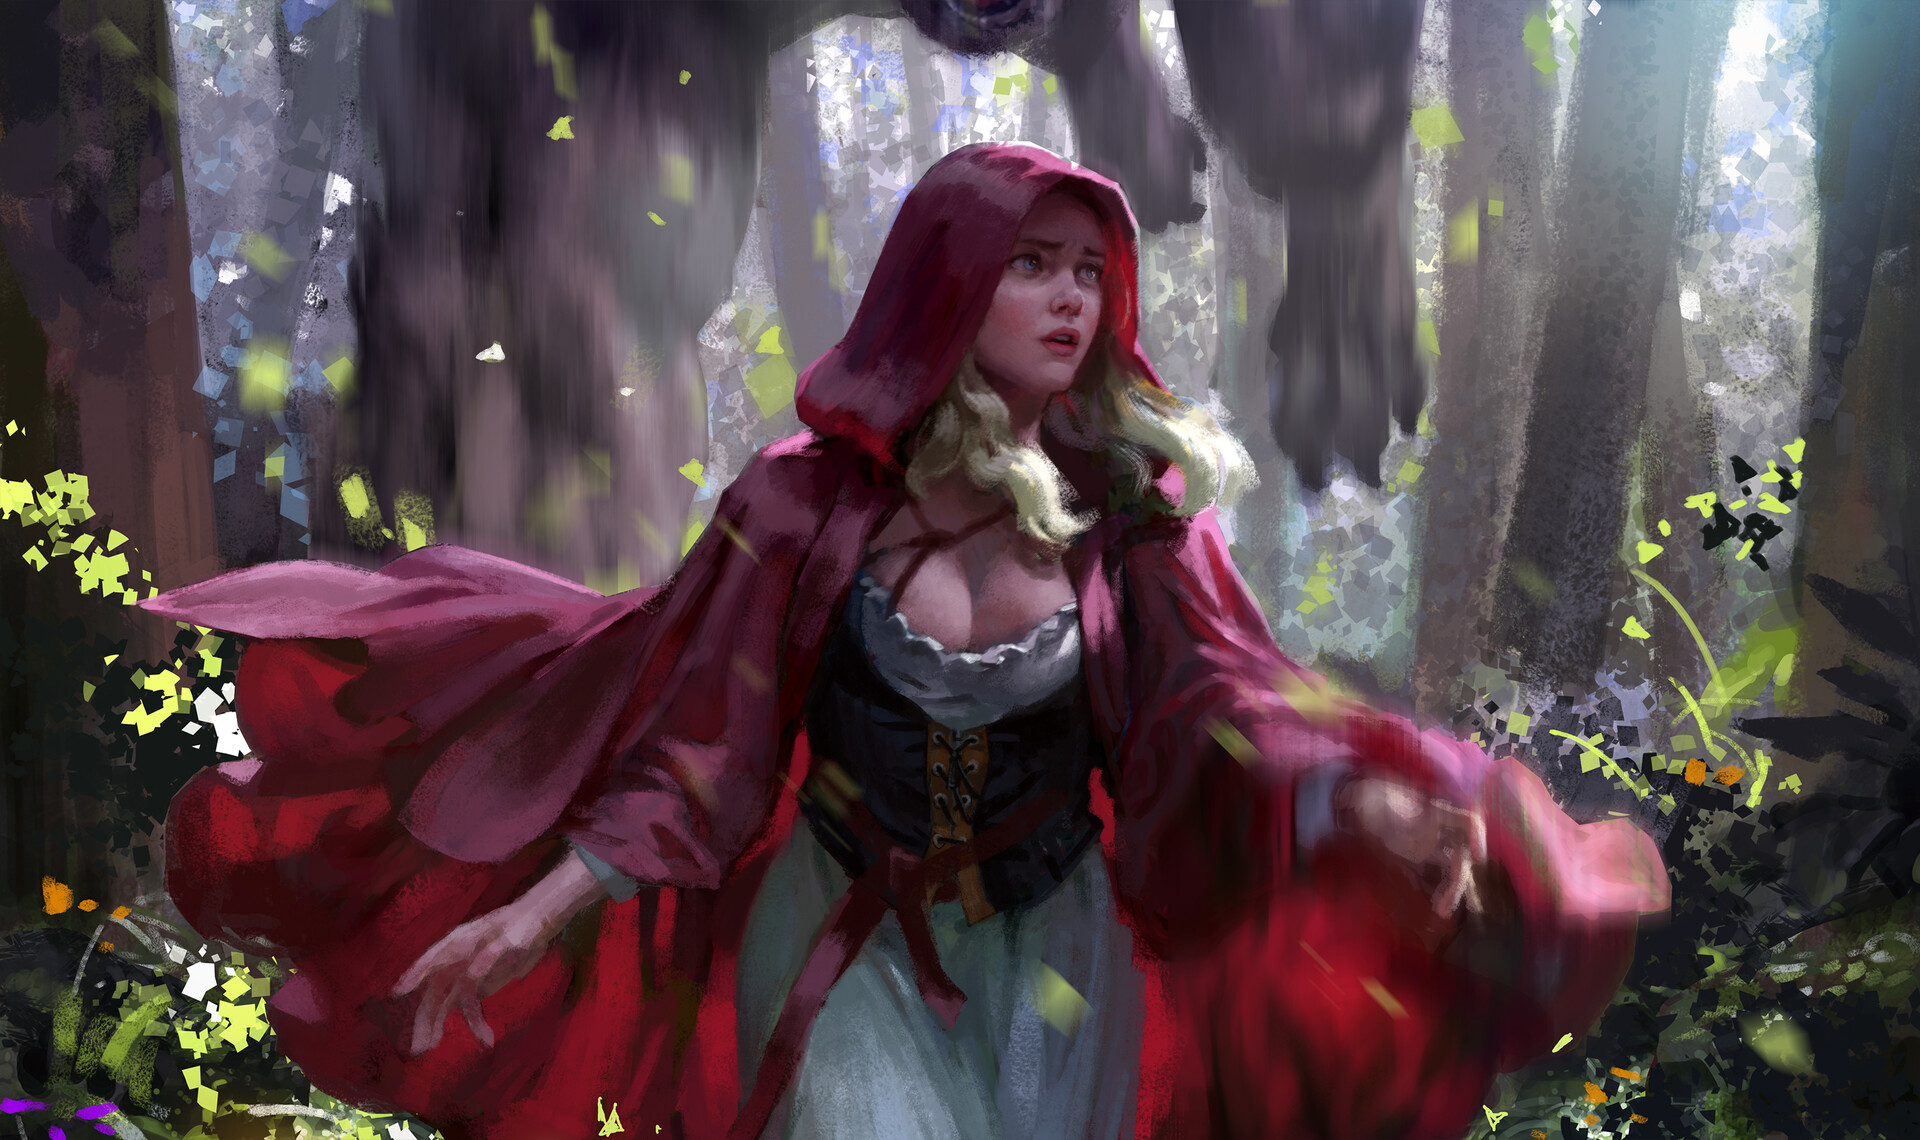 Witch cry 2 the red hood. Красная шапочка / Red riding Hood. Red Hood красная шапочка. Красная шапочка (Червона шапочка) (2008). Вайолет - красная шапочка.